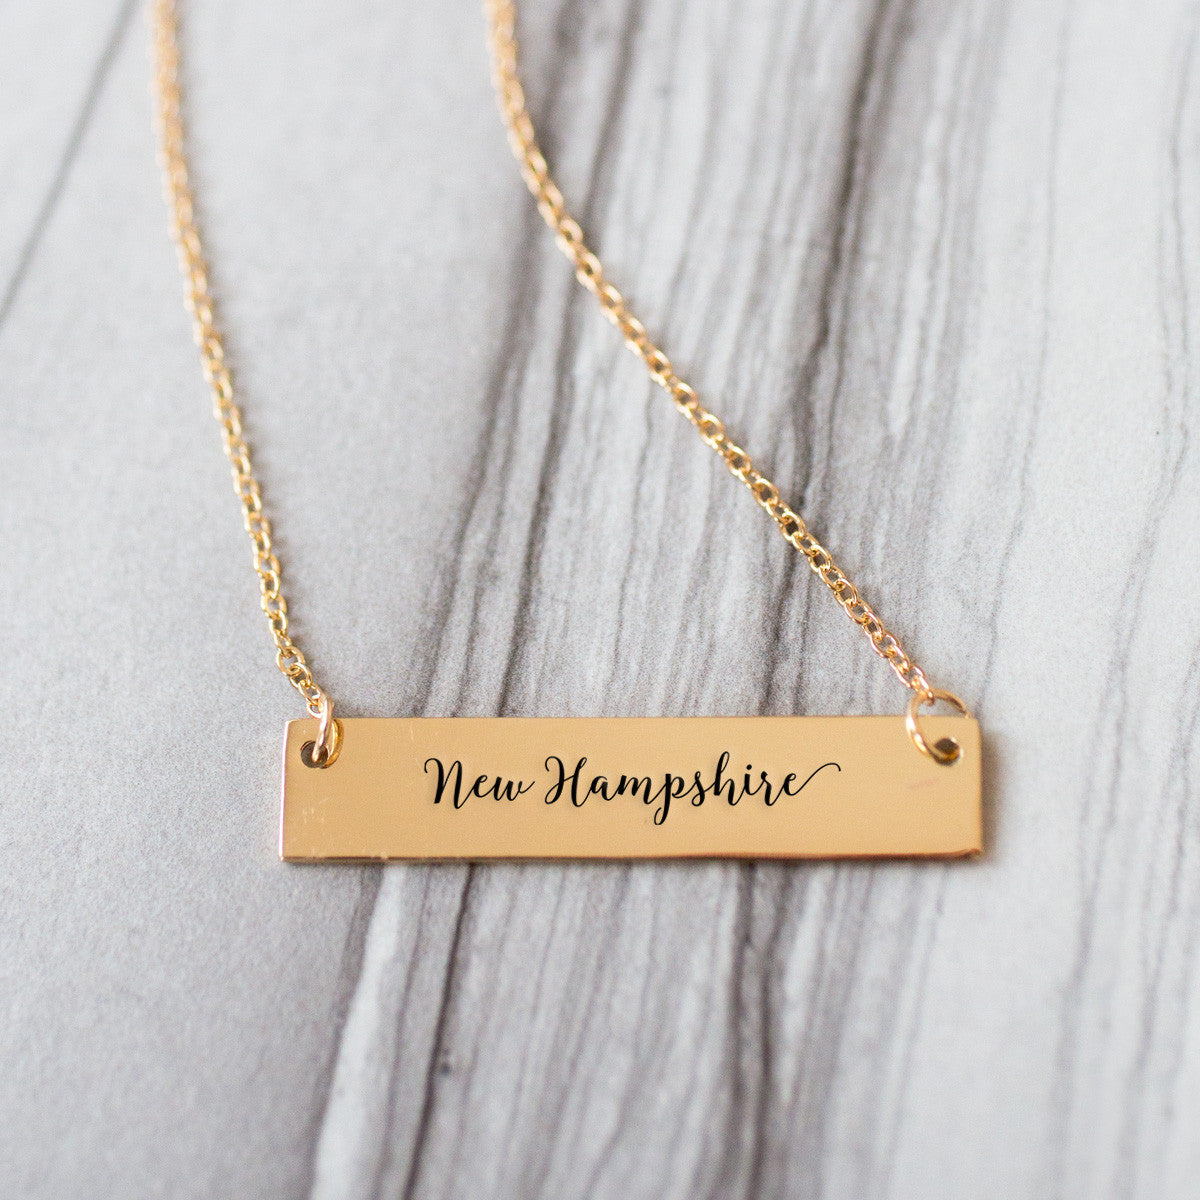 Home State Pride  Gold / Silver Bar Necklace - Select Your State! - pipercleo.com